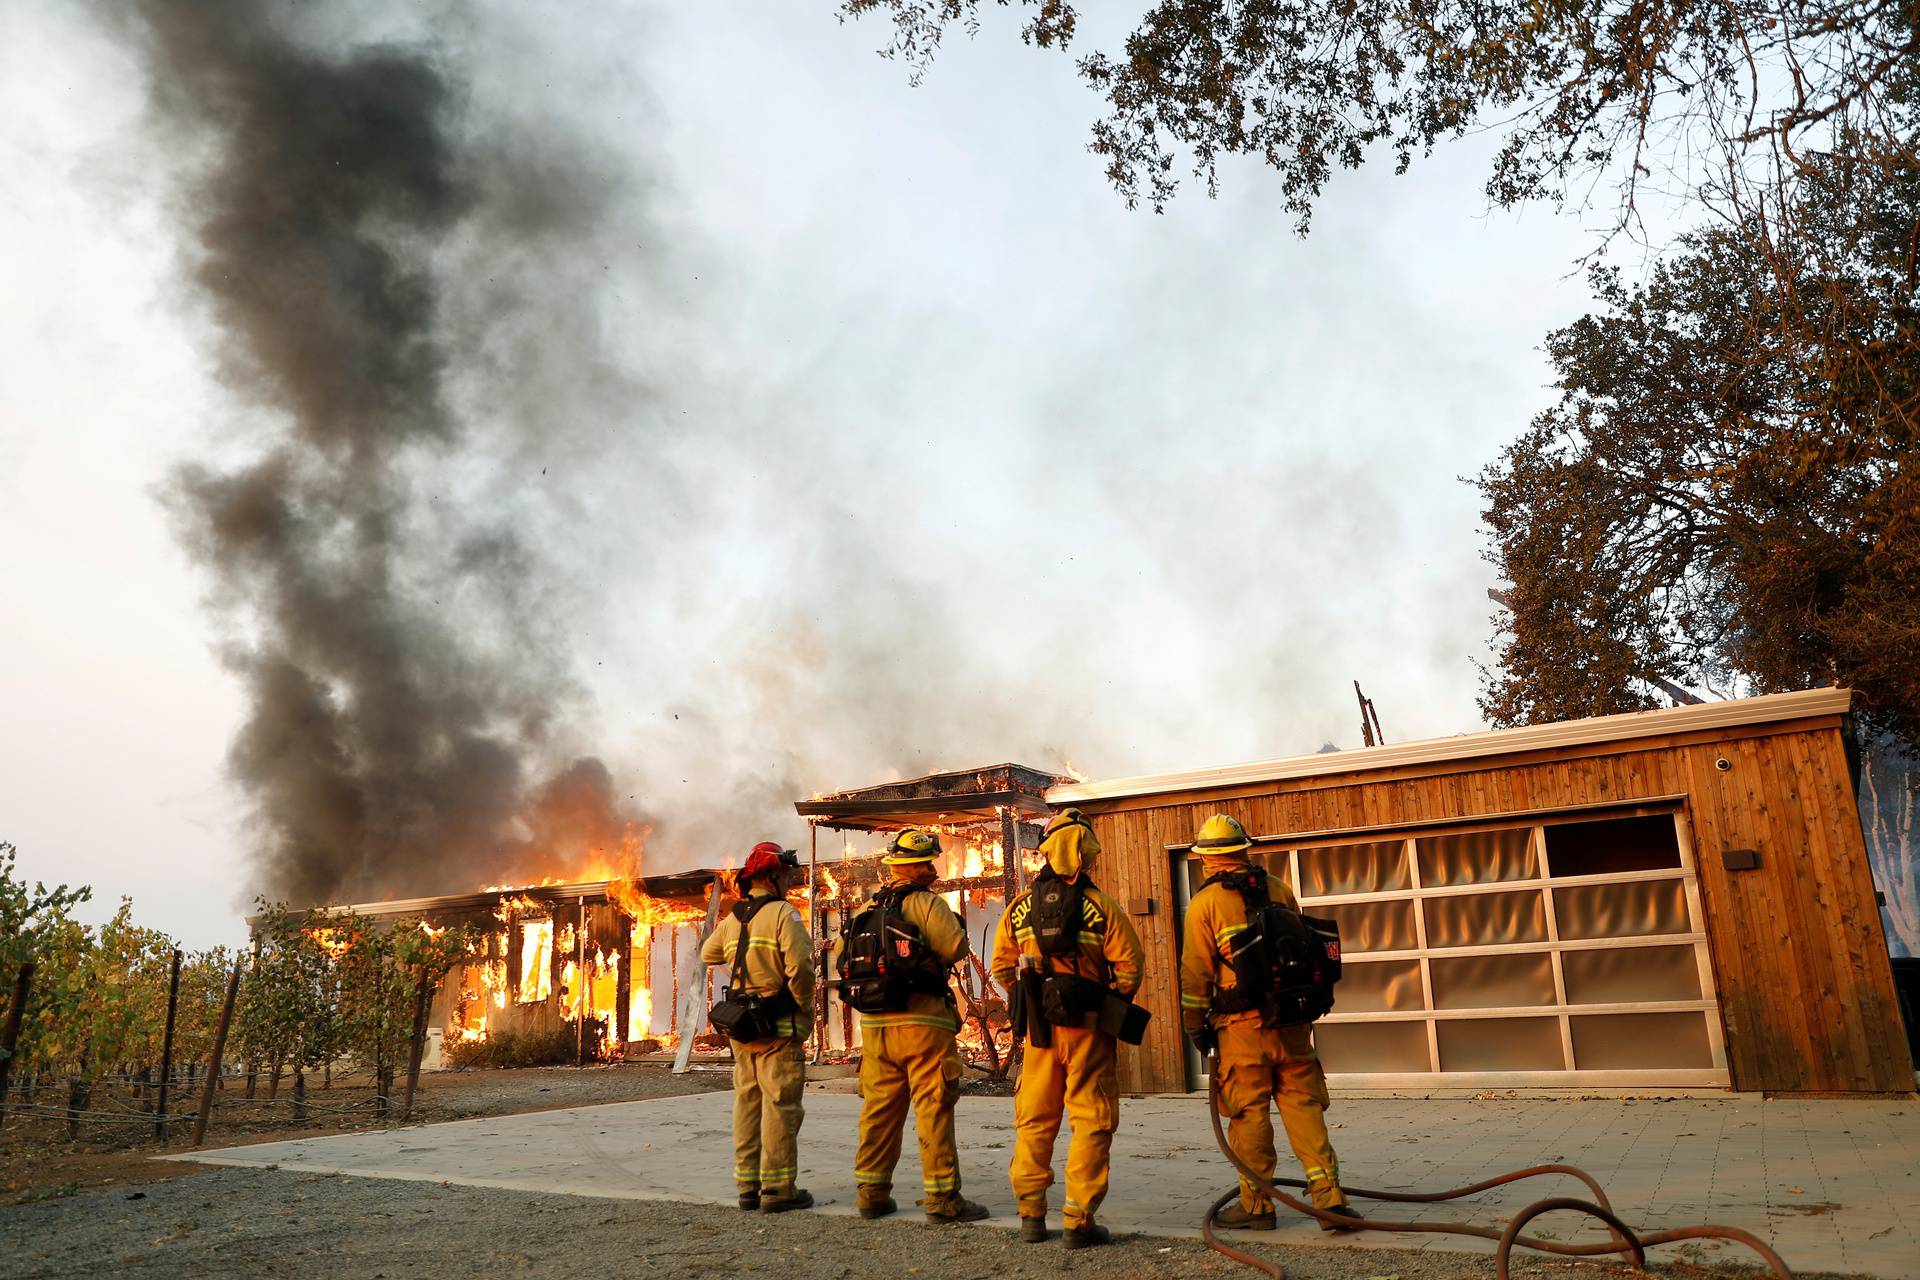 FILE PHOTO: A group of firefighters look on as a house burns during the wind-driven Kincade Fire in Healdsburg, California